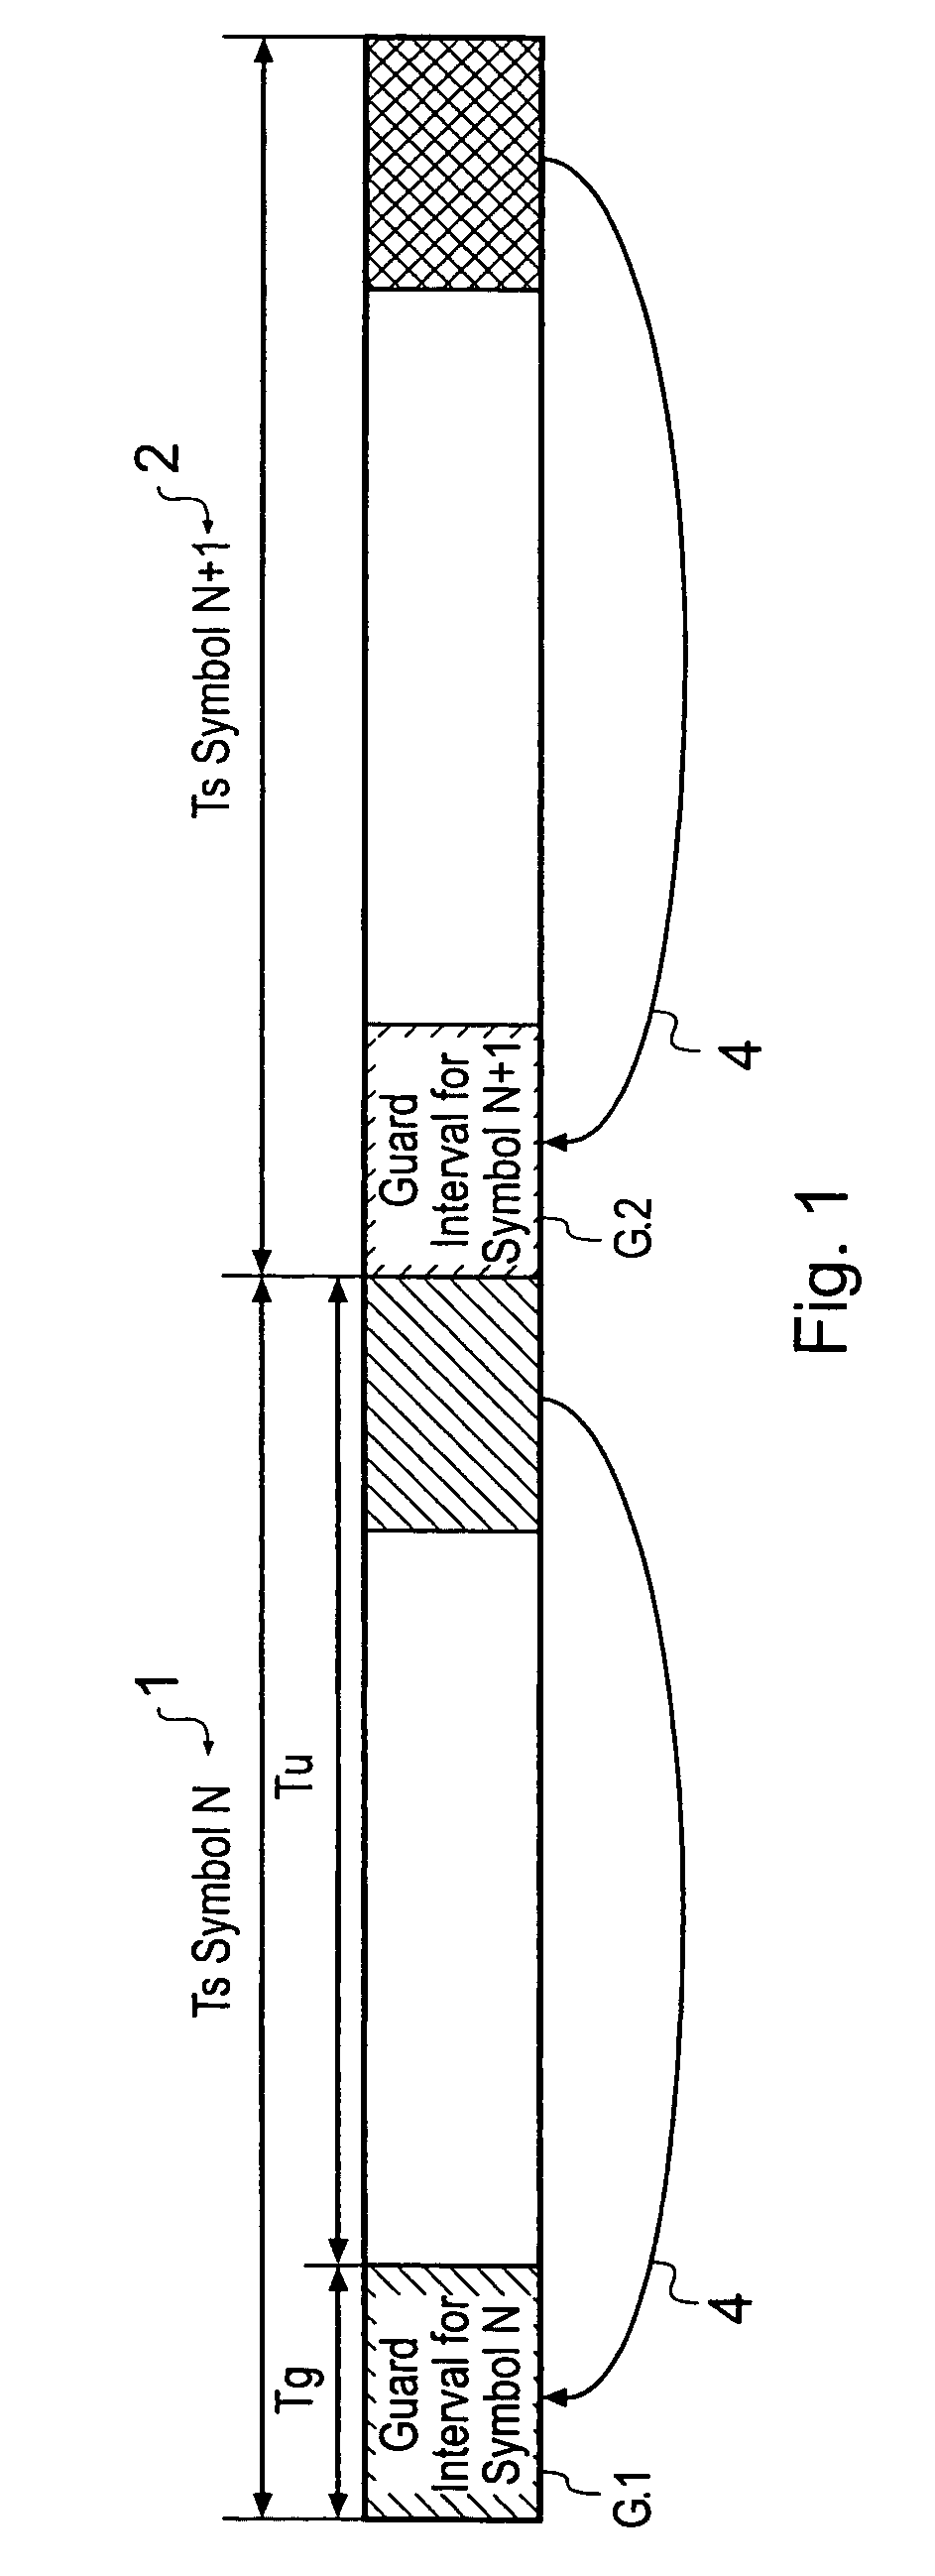 Receiver for recovering data from an OFDM symbol